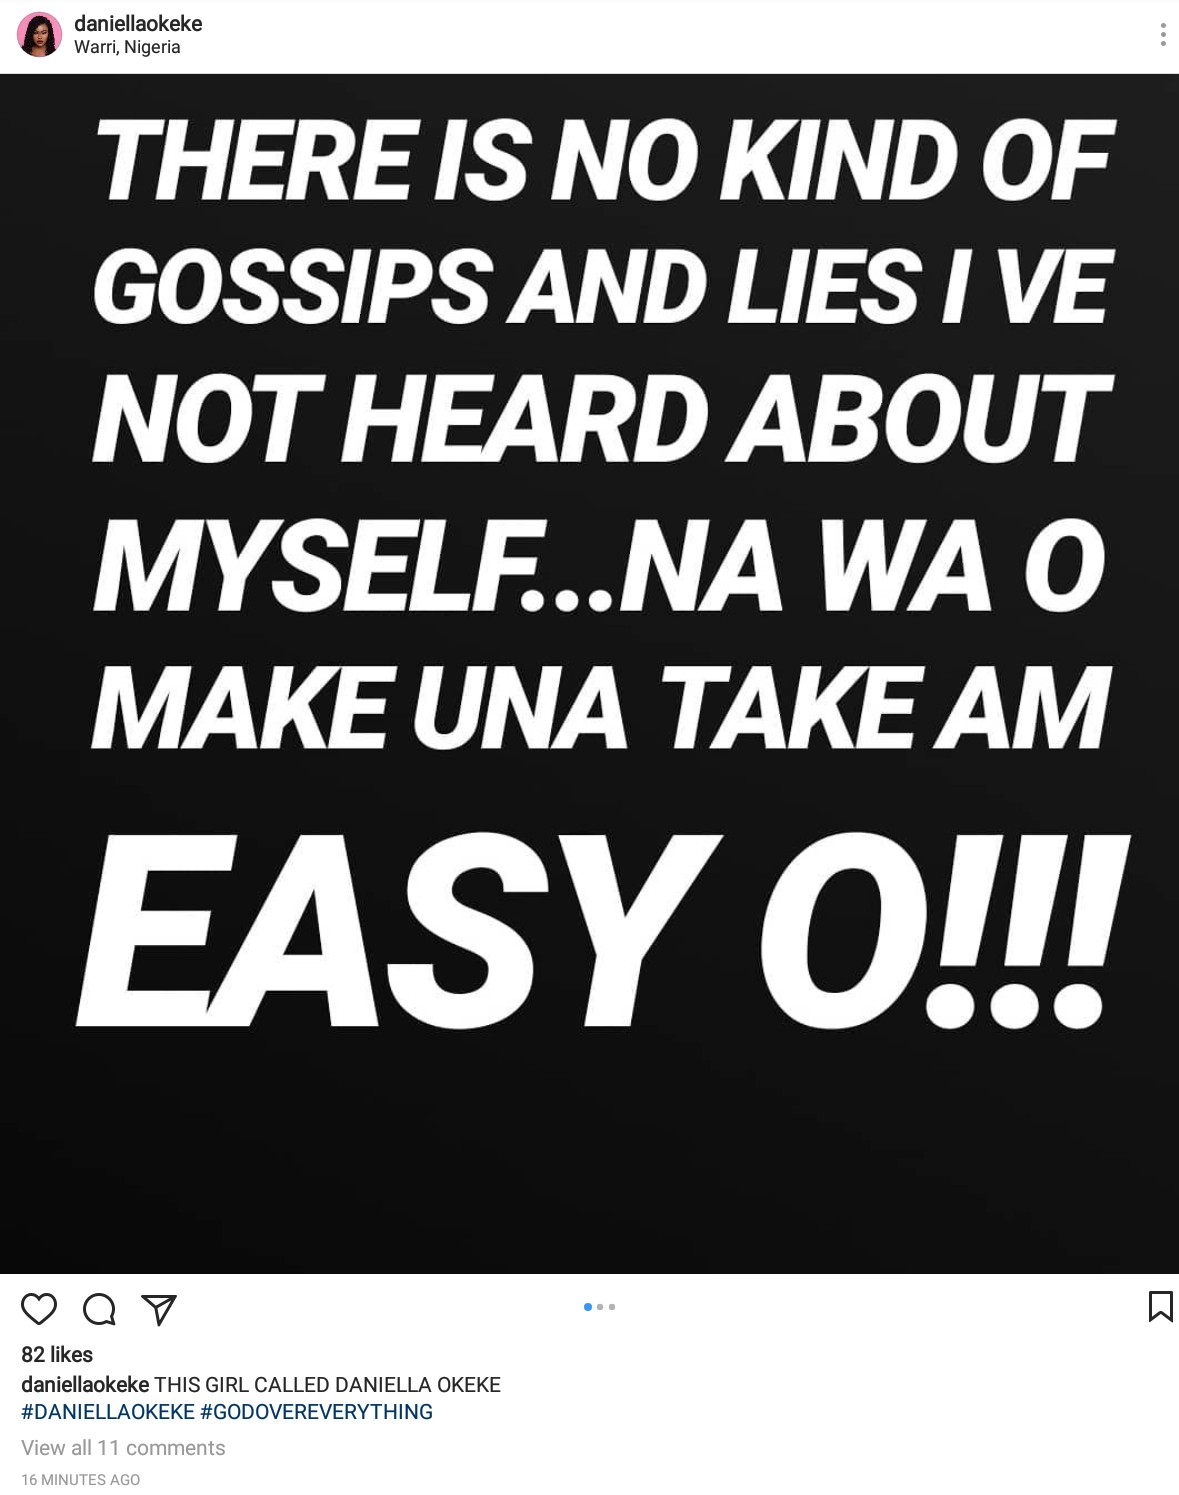 Daniella Okeke Cries Out Her Name Be Left Out Of Mouths (2)